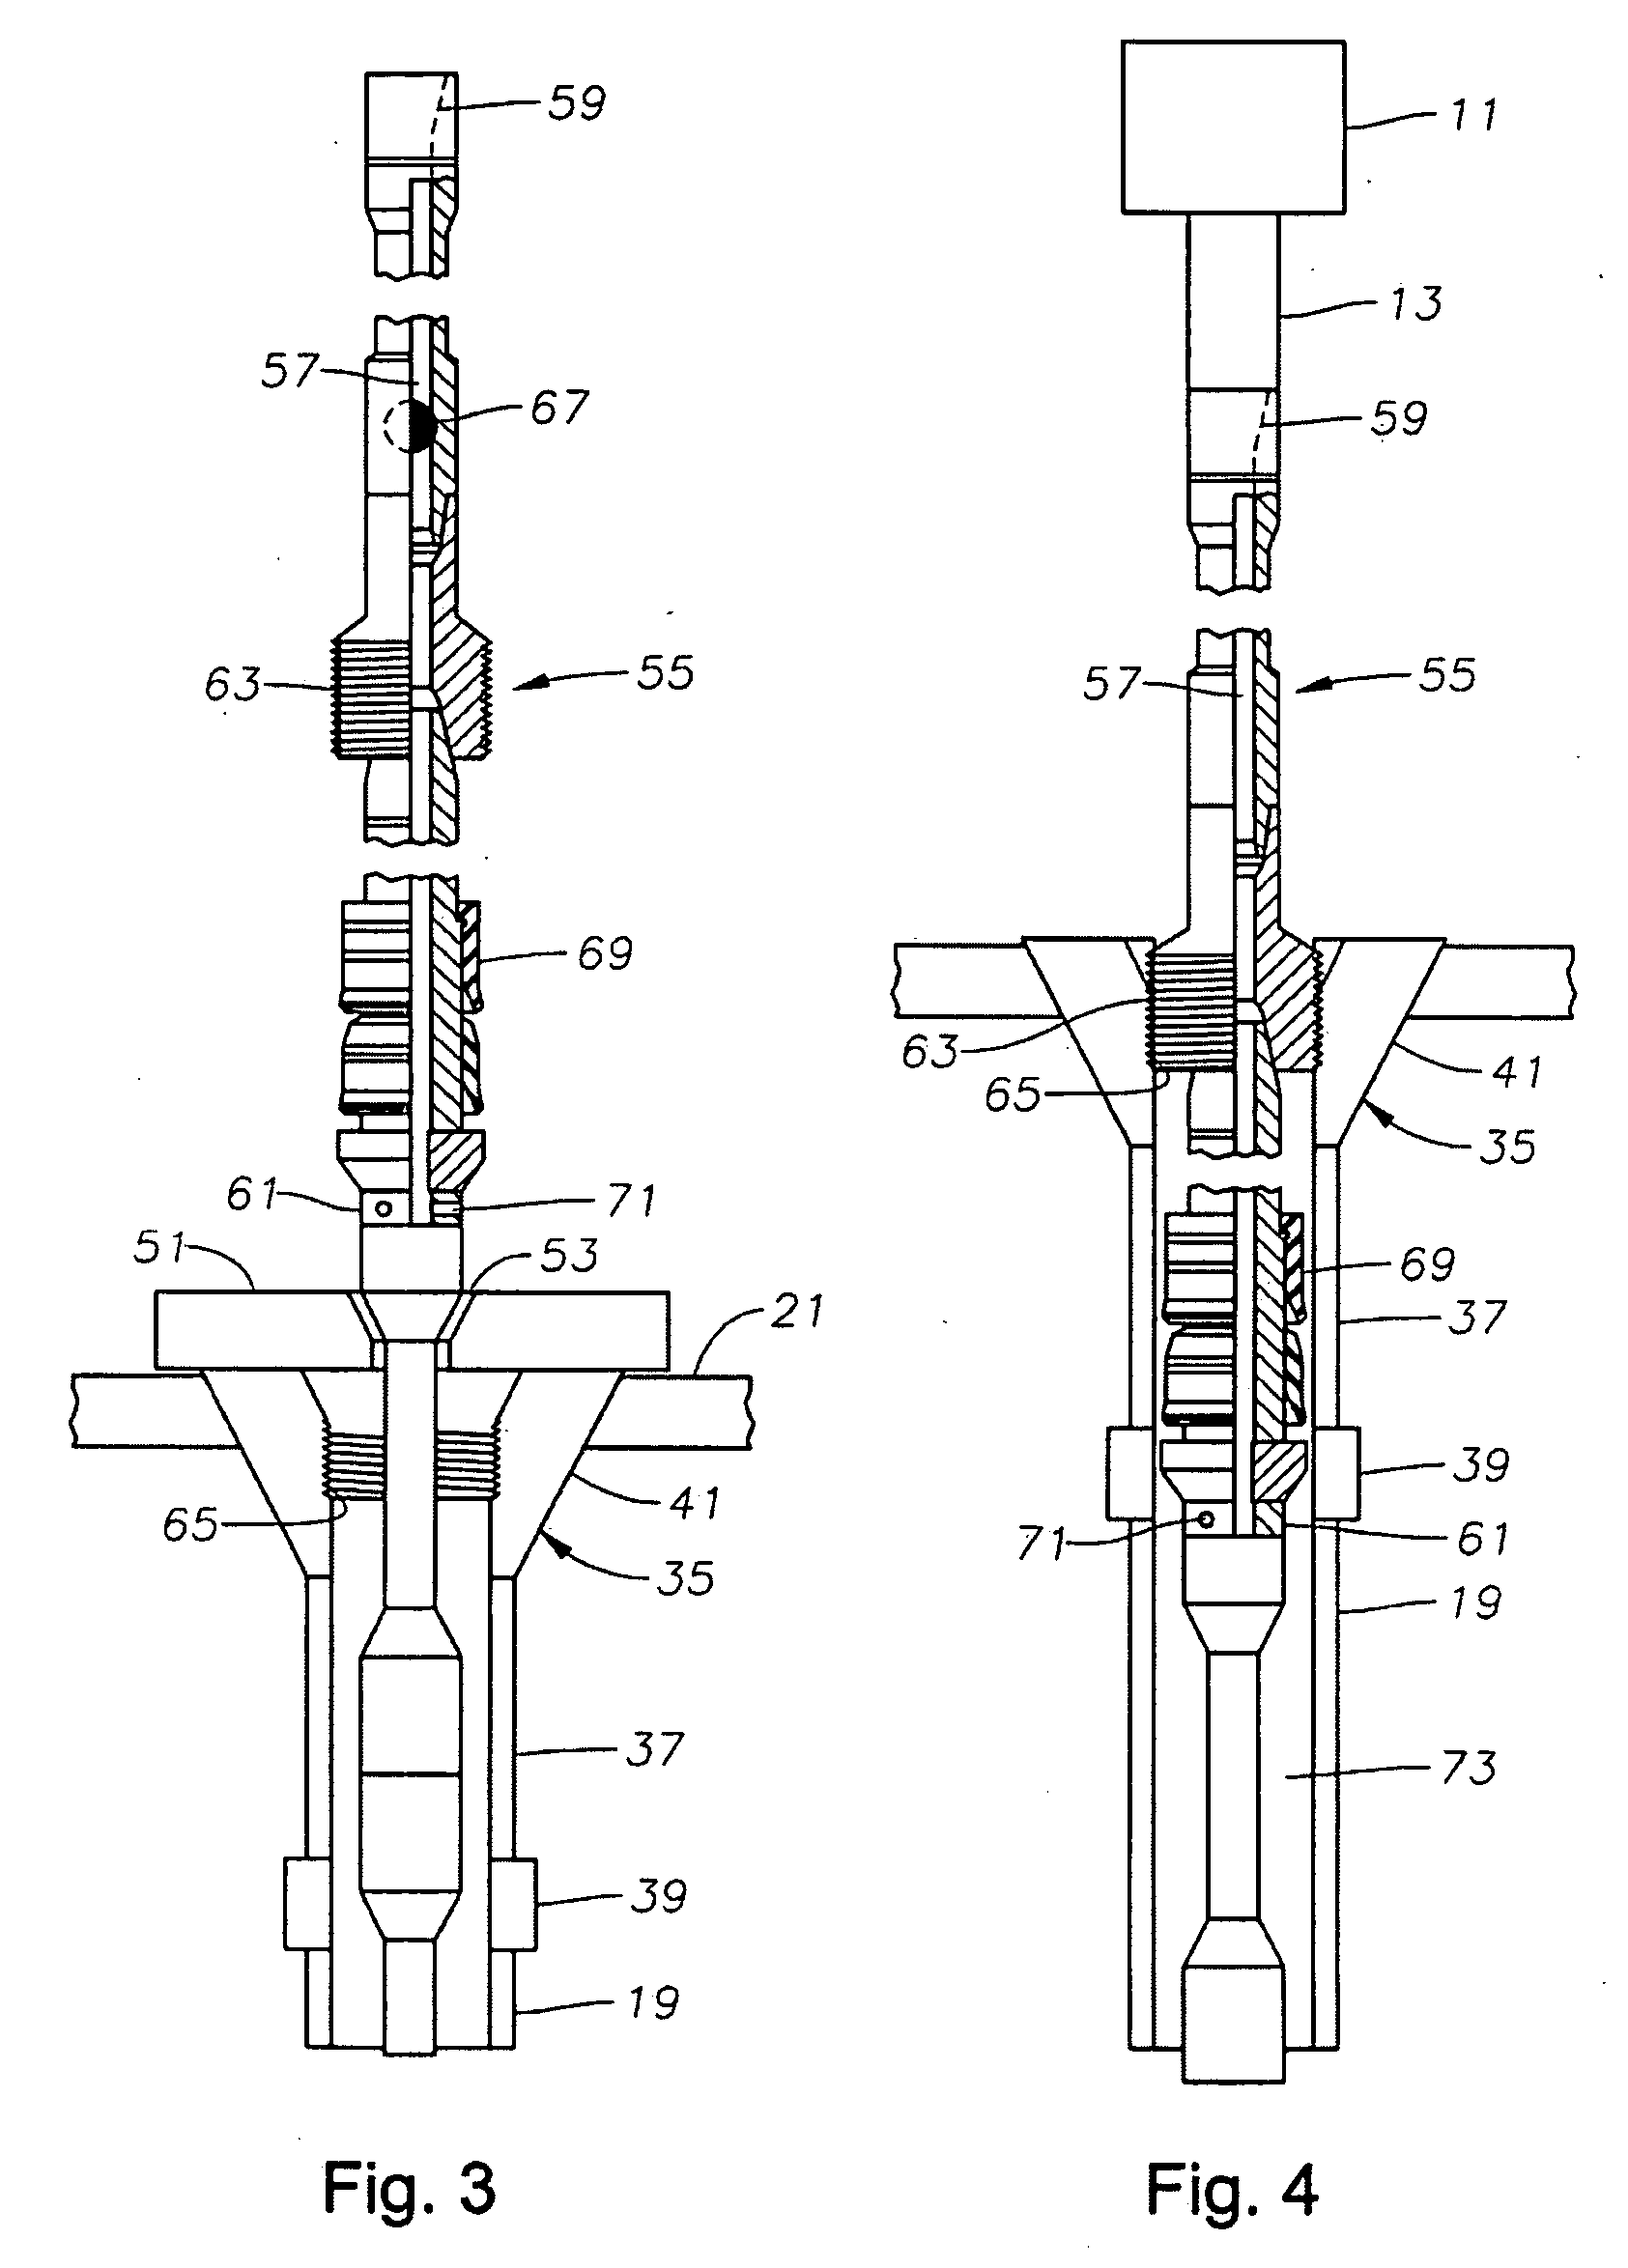 Method of Circulating While Retrieving Downhole Tool in Casing